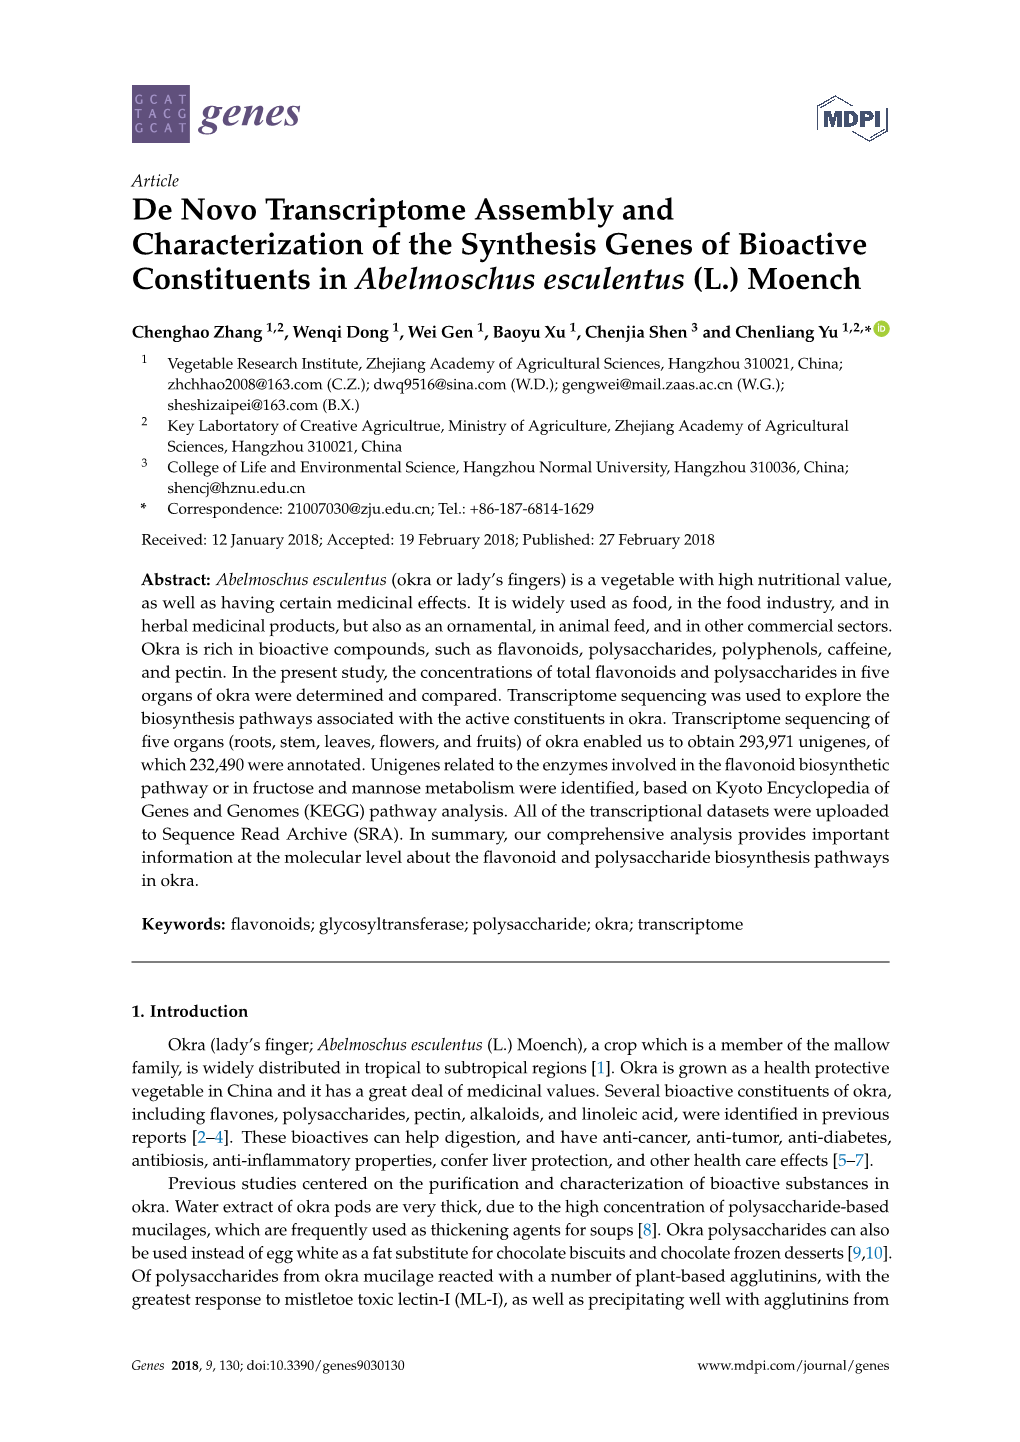 De Novo Transcriptome Assembly and Characterization of the Synthesis Genes of Bioactive Constituents in Abelmoschus Esculentus (L.) Moench